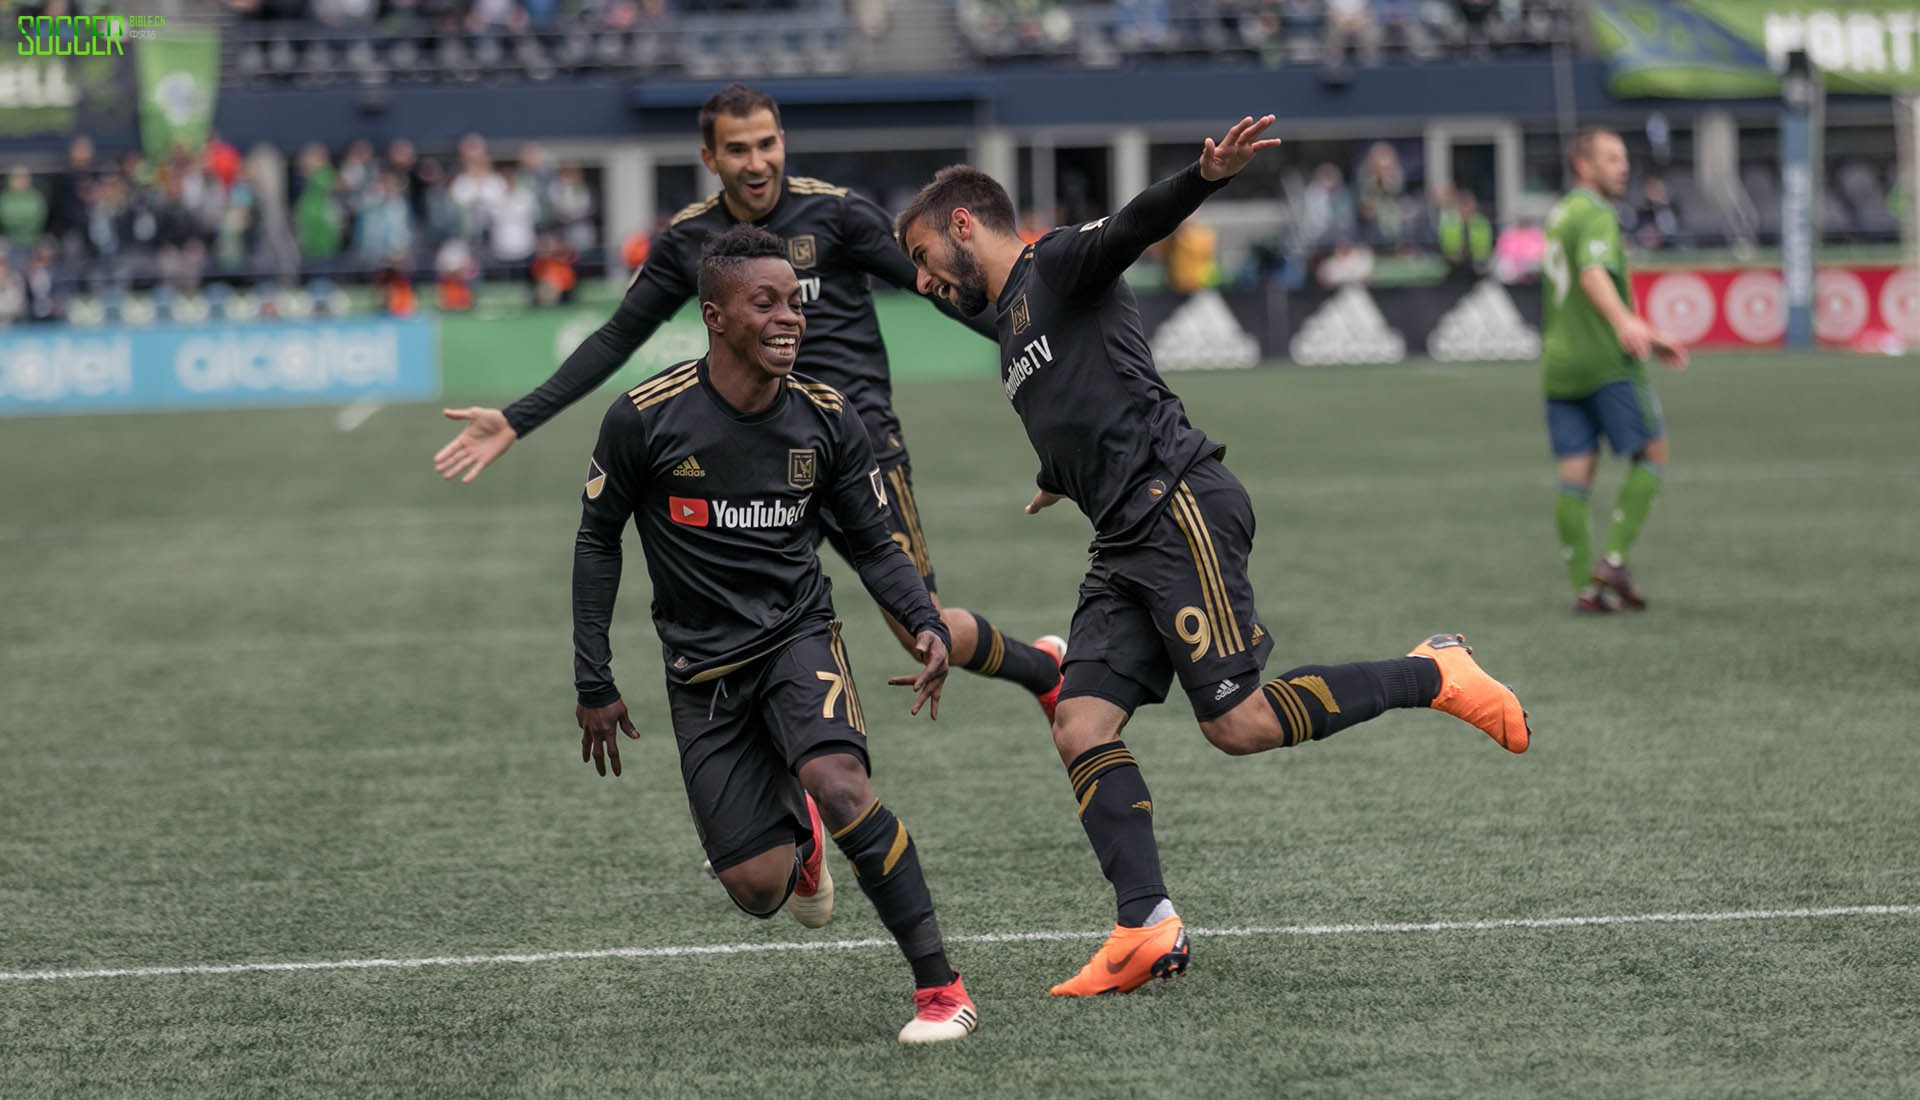 lafc-first-win-soccerbible_0003_594a7322